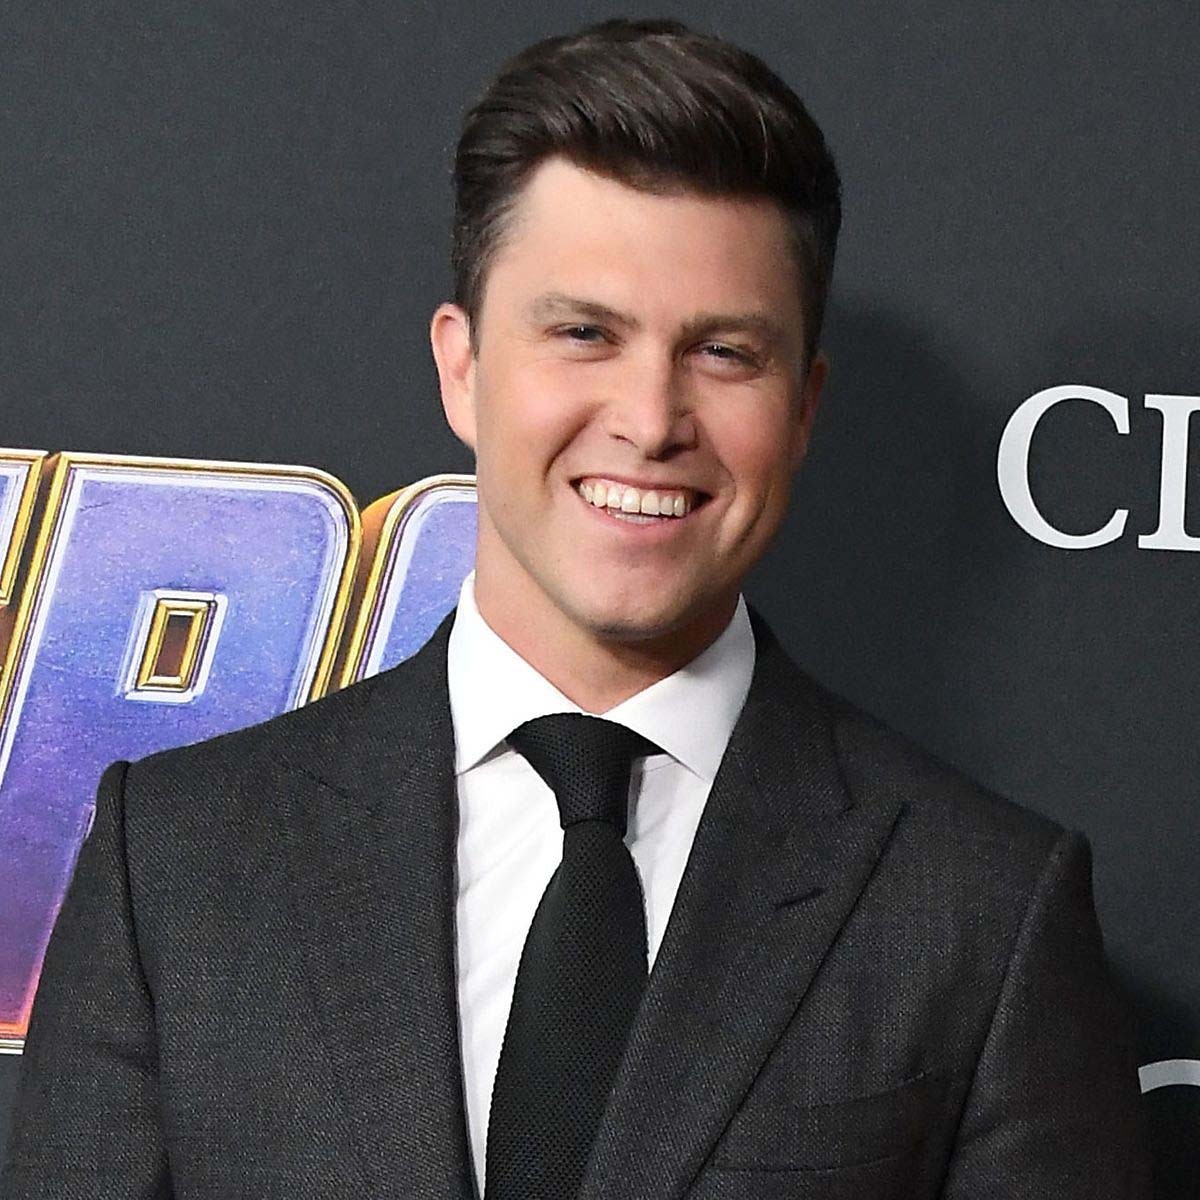 Saturday Night Live head writer Colin Jost wants to part with his longtime bachelor pad. https://t.co/ueODnaUGnW https://t.co/HyC4hnEDBl